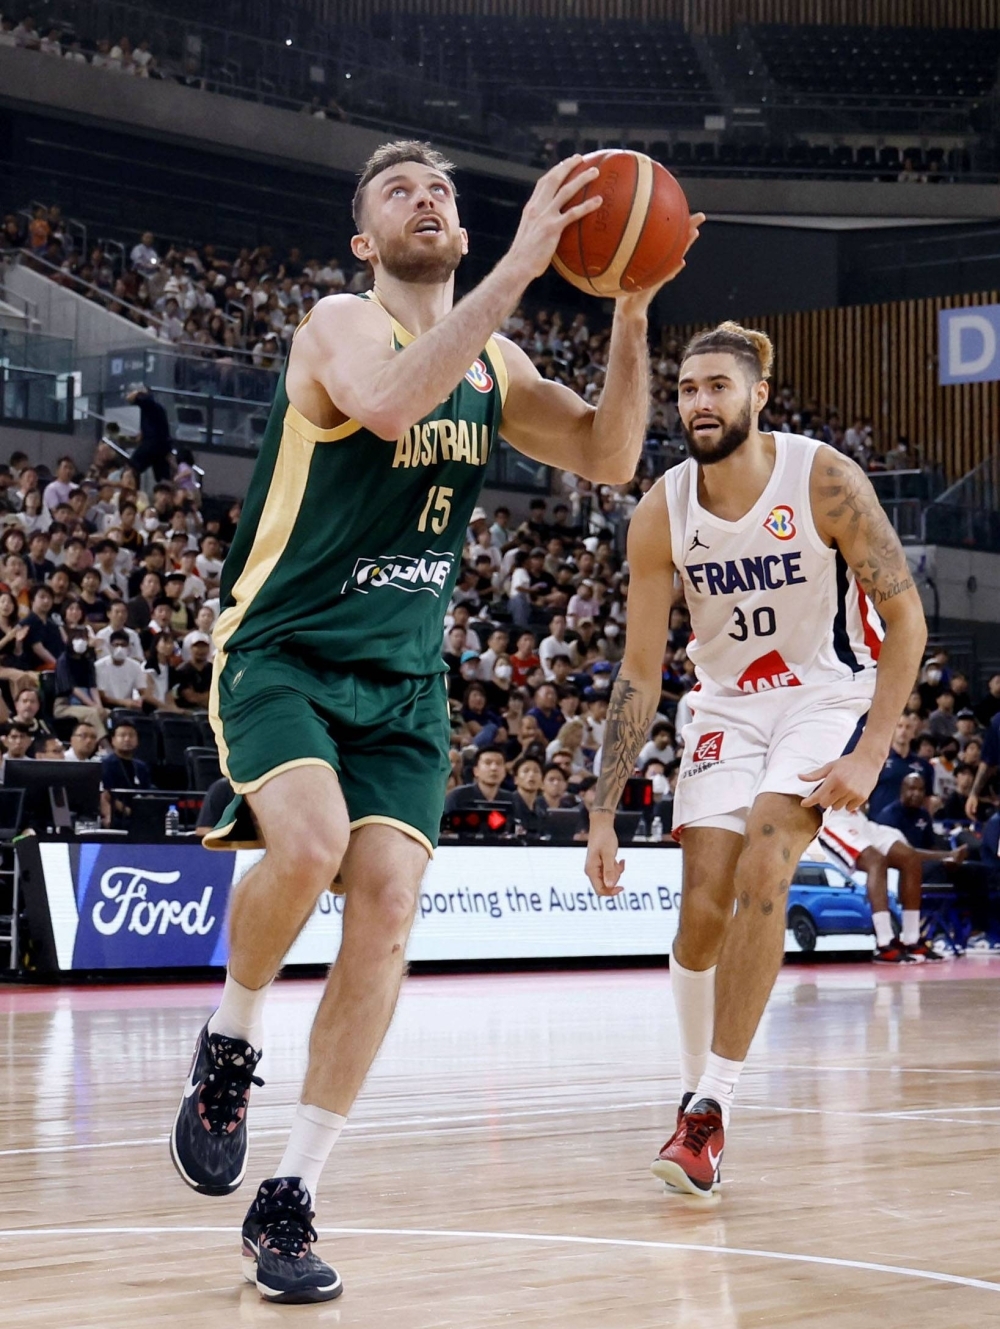 Australian forward Nick Kay scored 12 points in his team's win over France at Ariake Arena on Sunday.